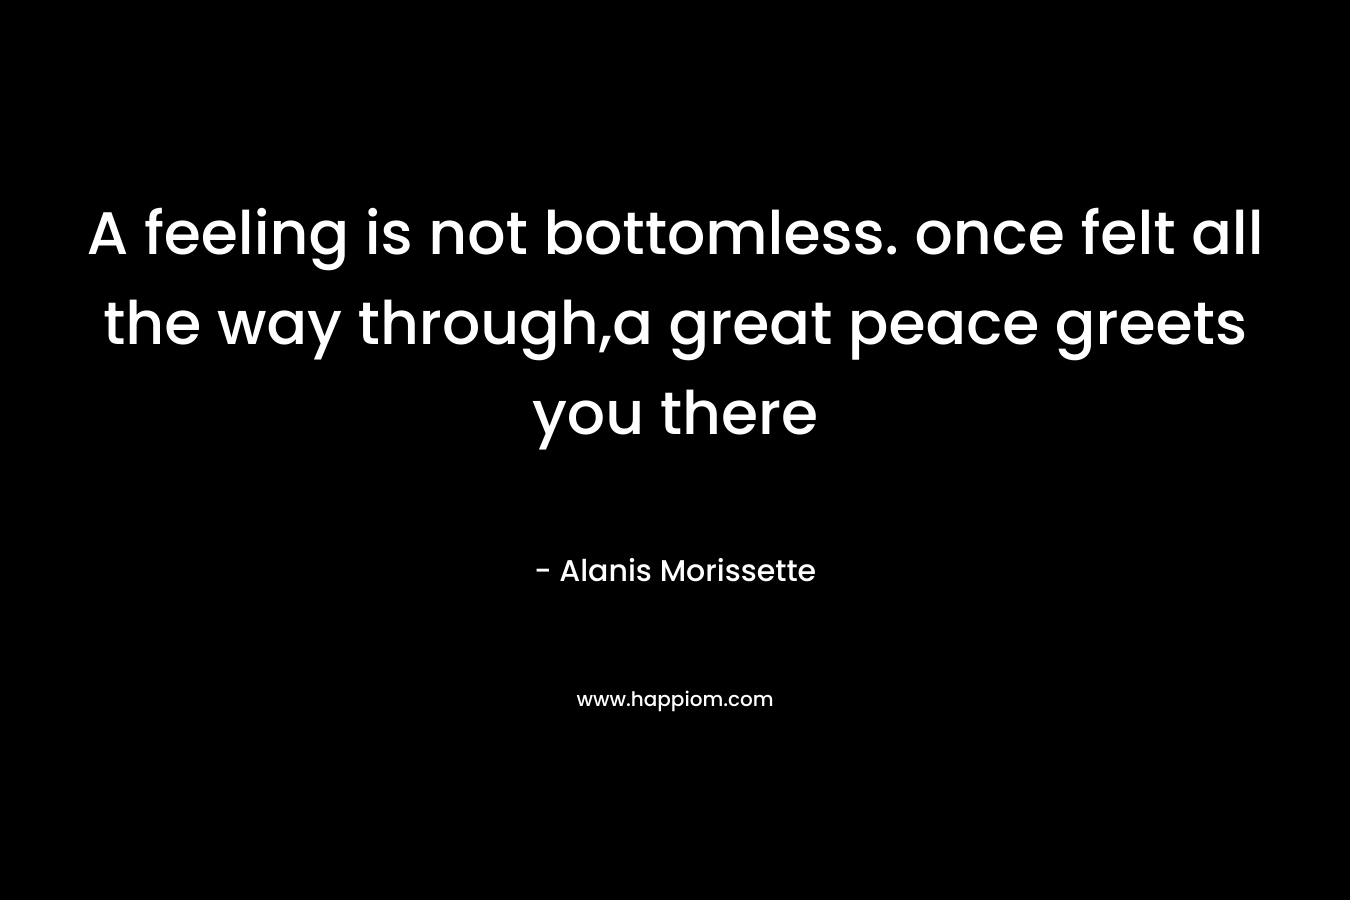 A feeling is not bottomless. once felt all the way through,a great peace greets you there